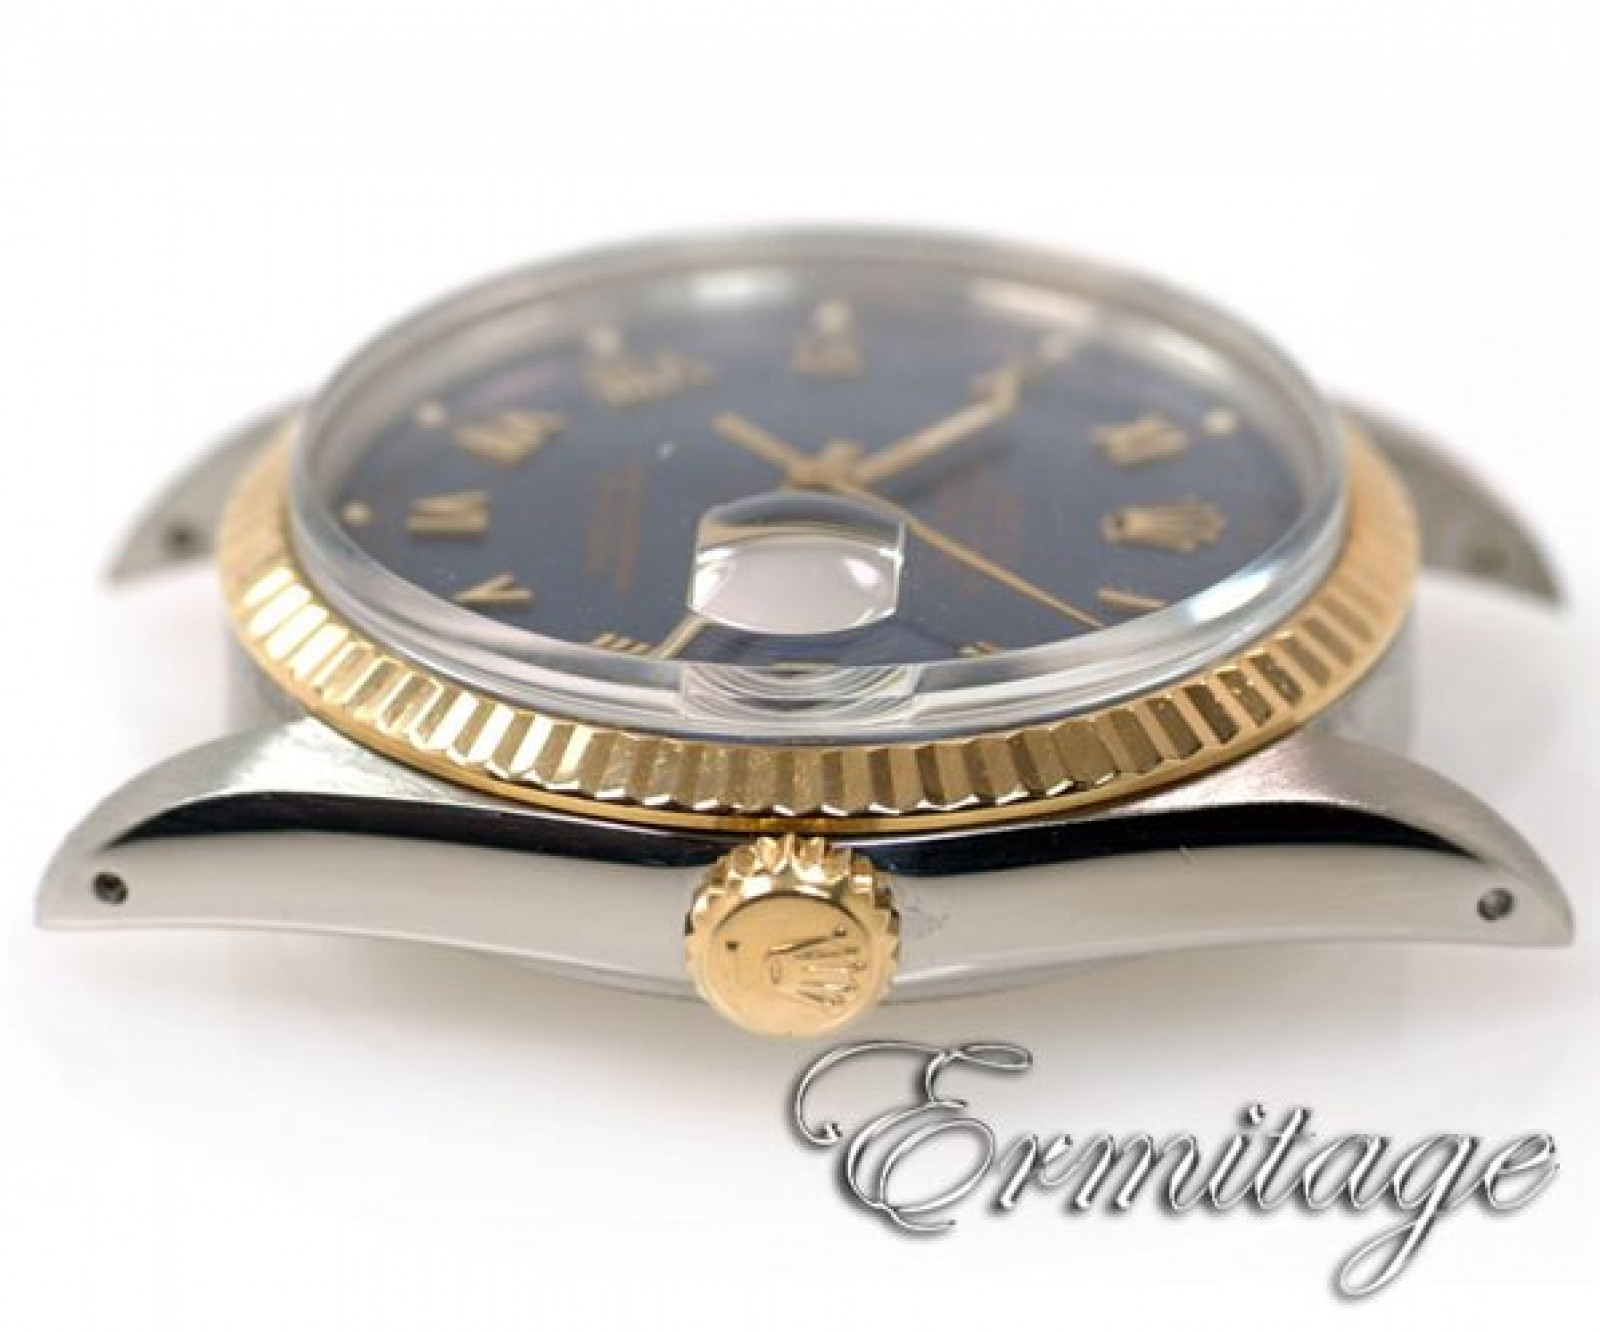 Pre-Owned Rolex Datejust 16013 Gold & Steel with Blue Dial